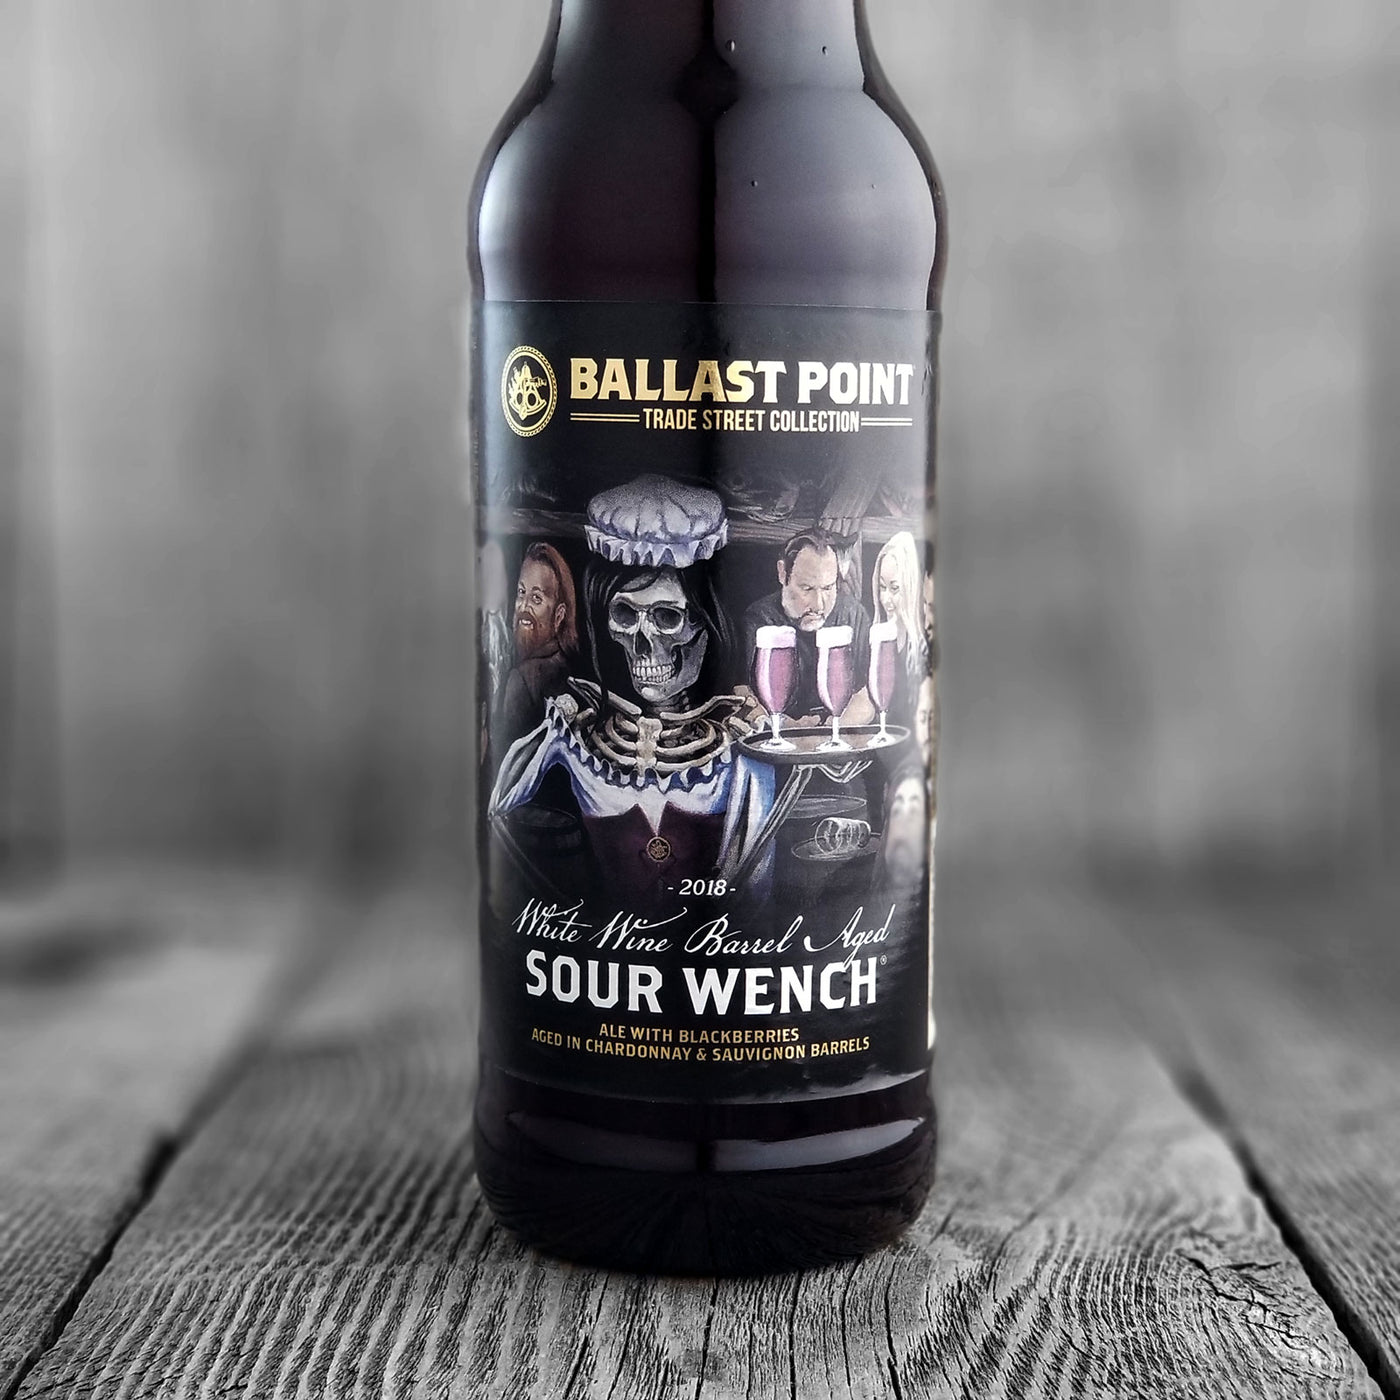 Ballast Point Barrel Aged Sour Wench